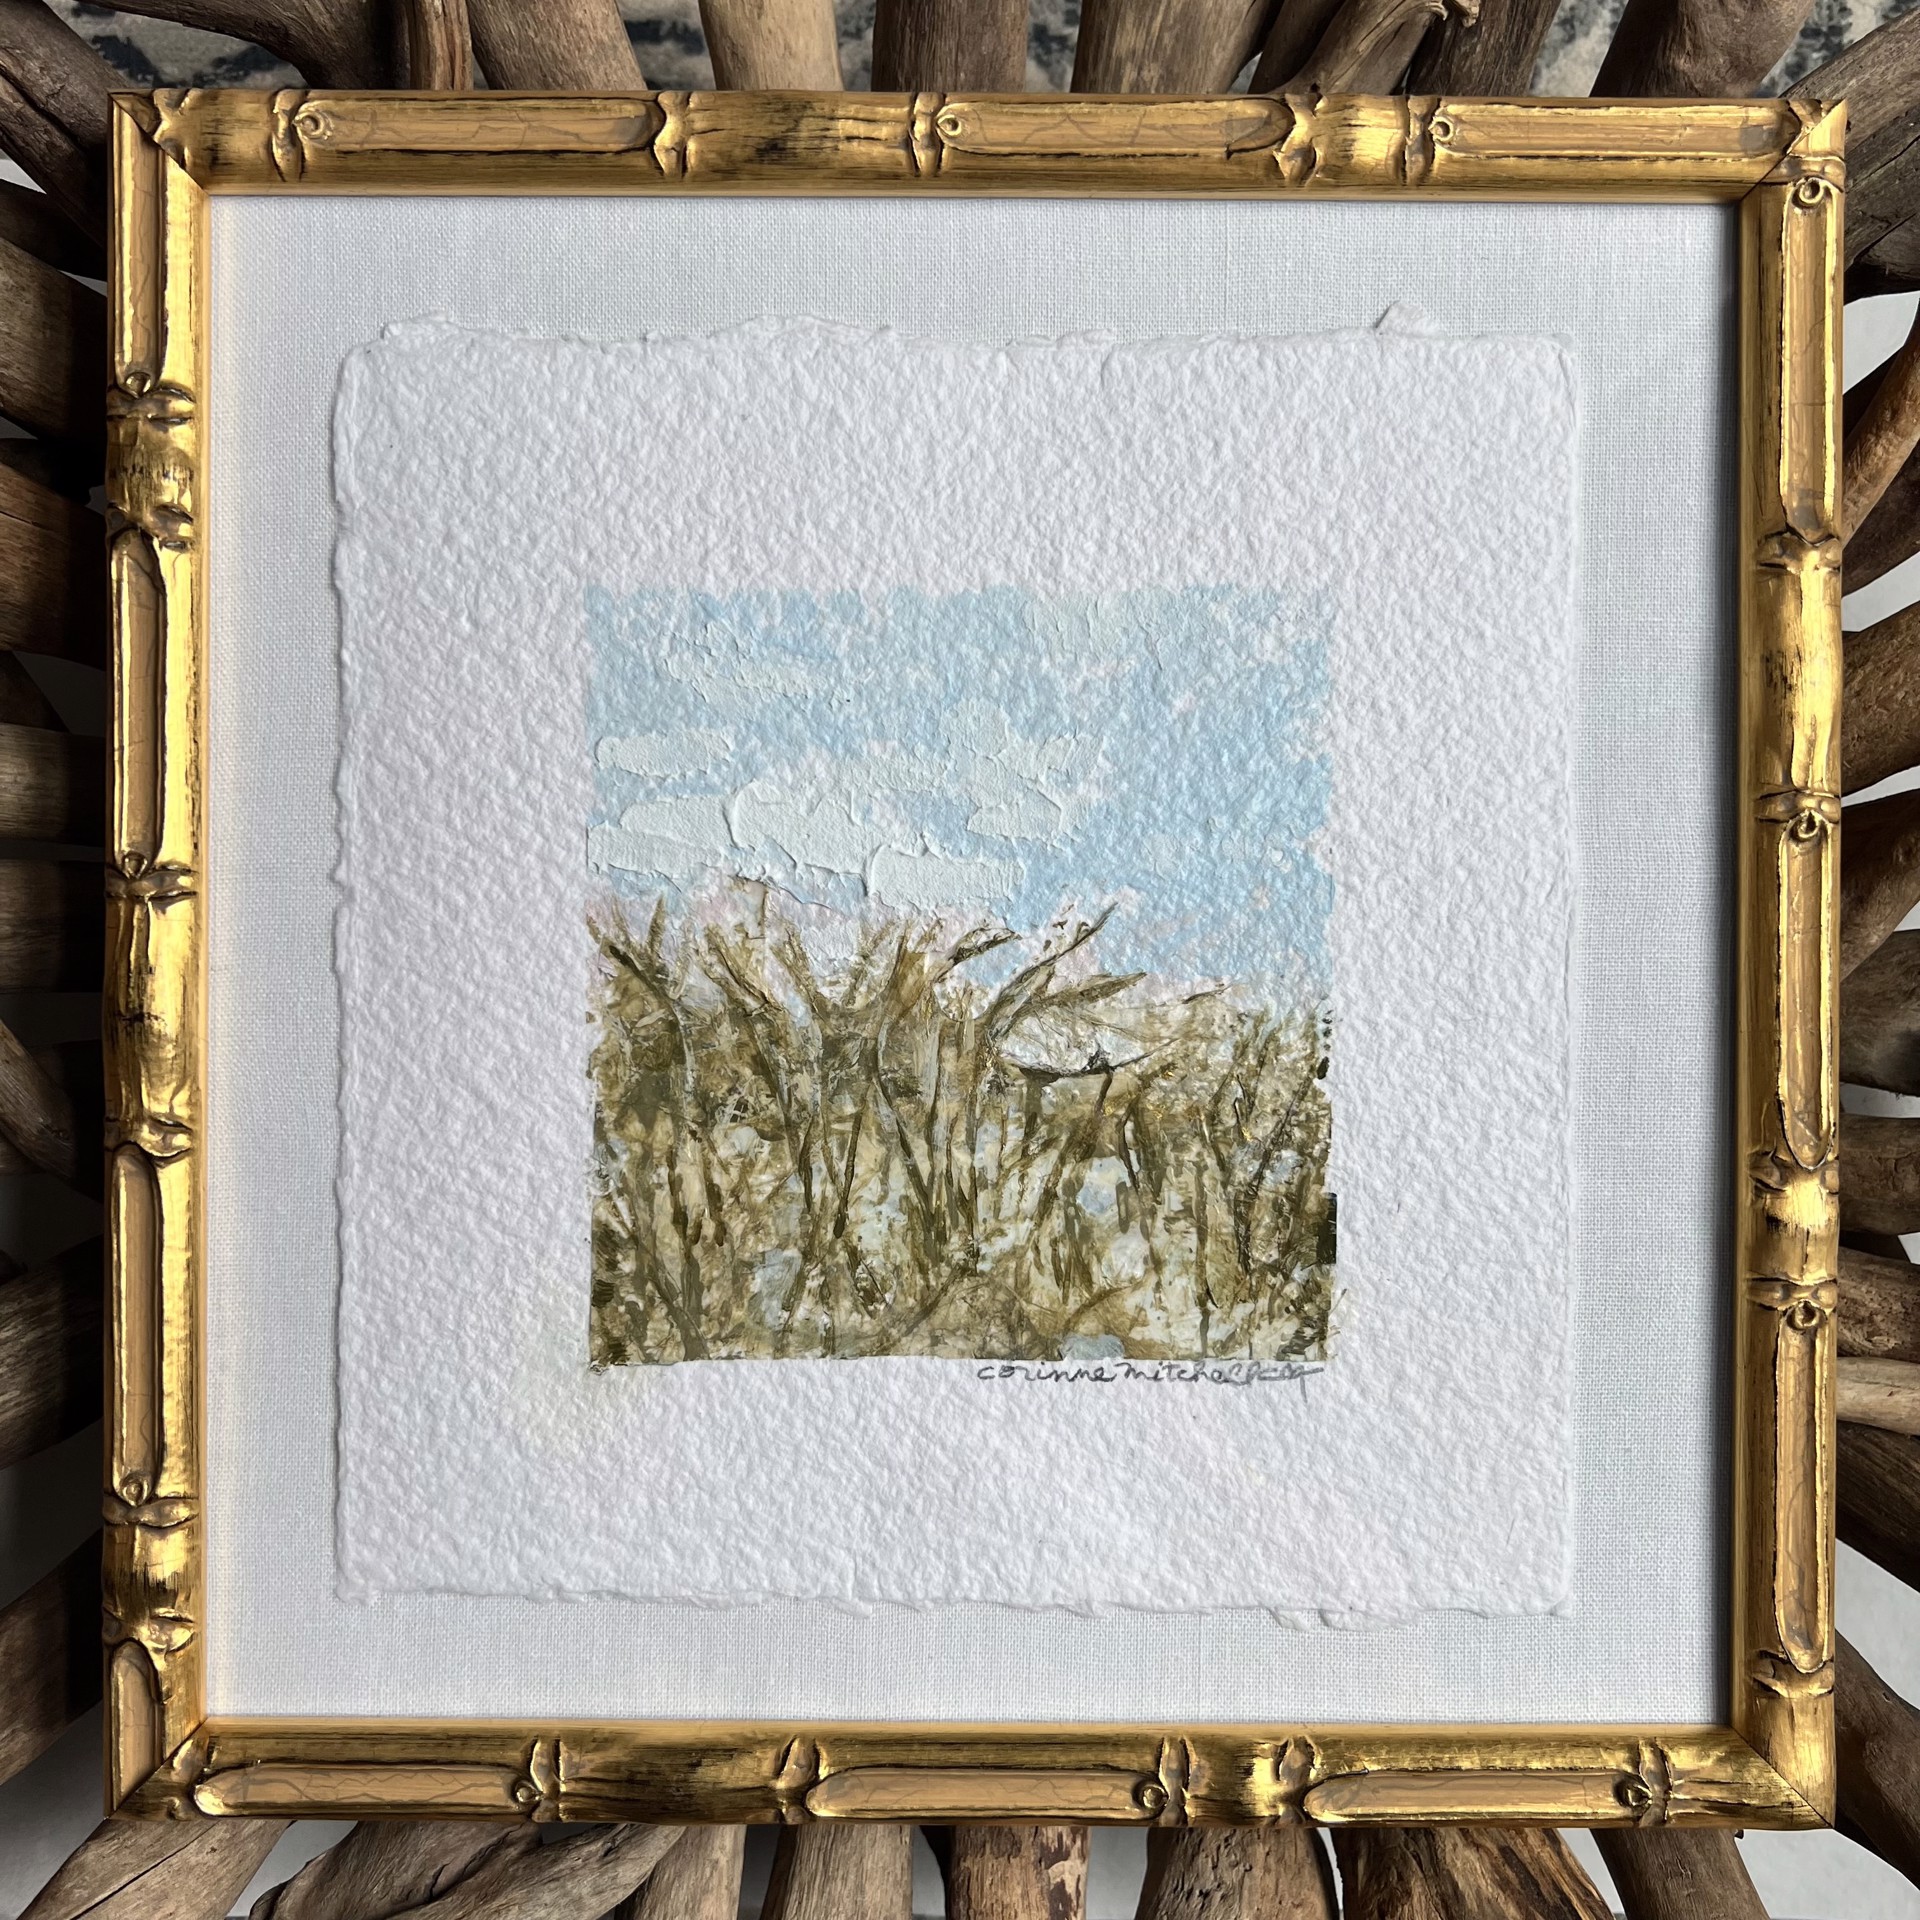 Wind-bowed marsh grasses by Corinne Mitchell